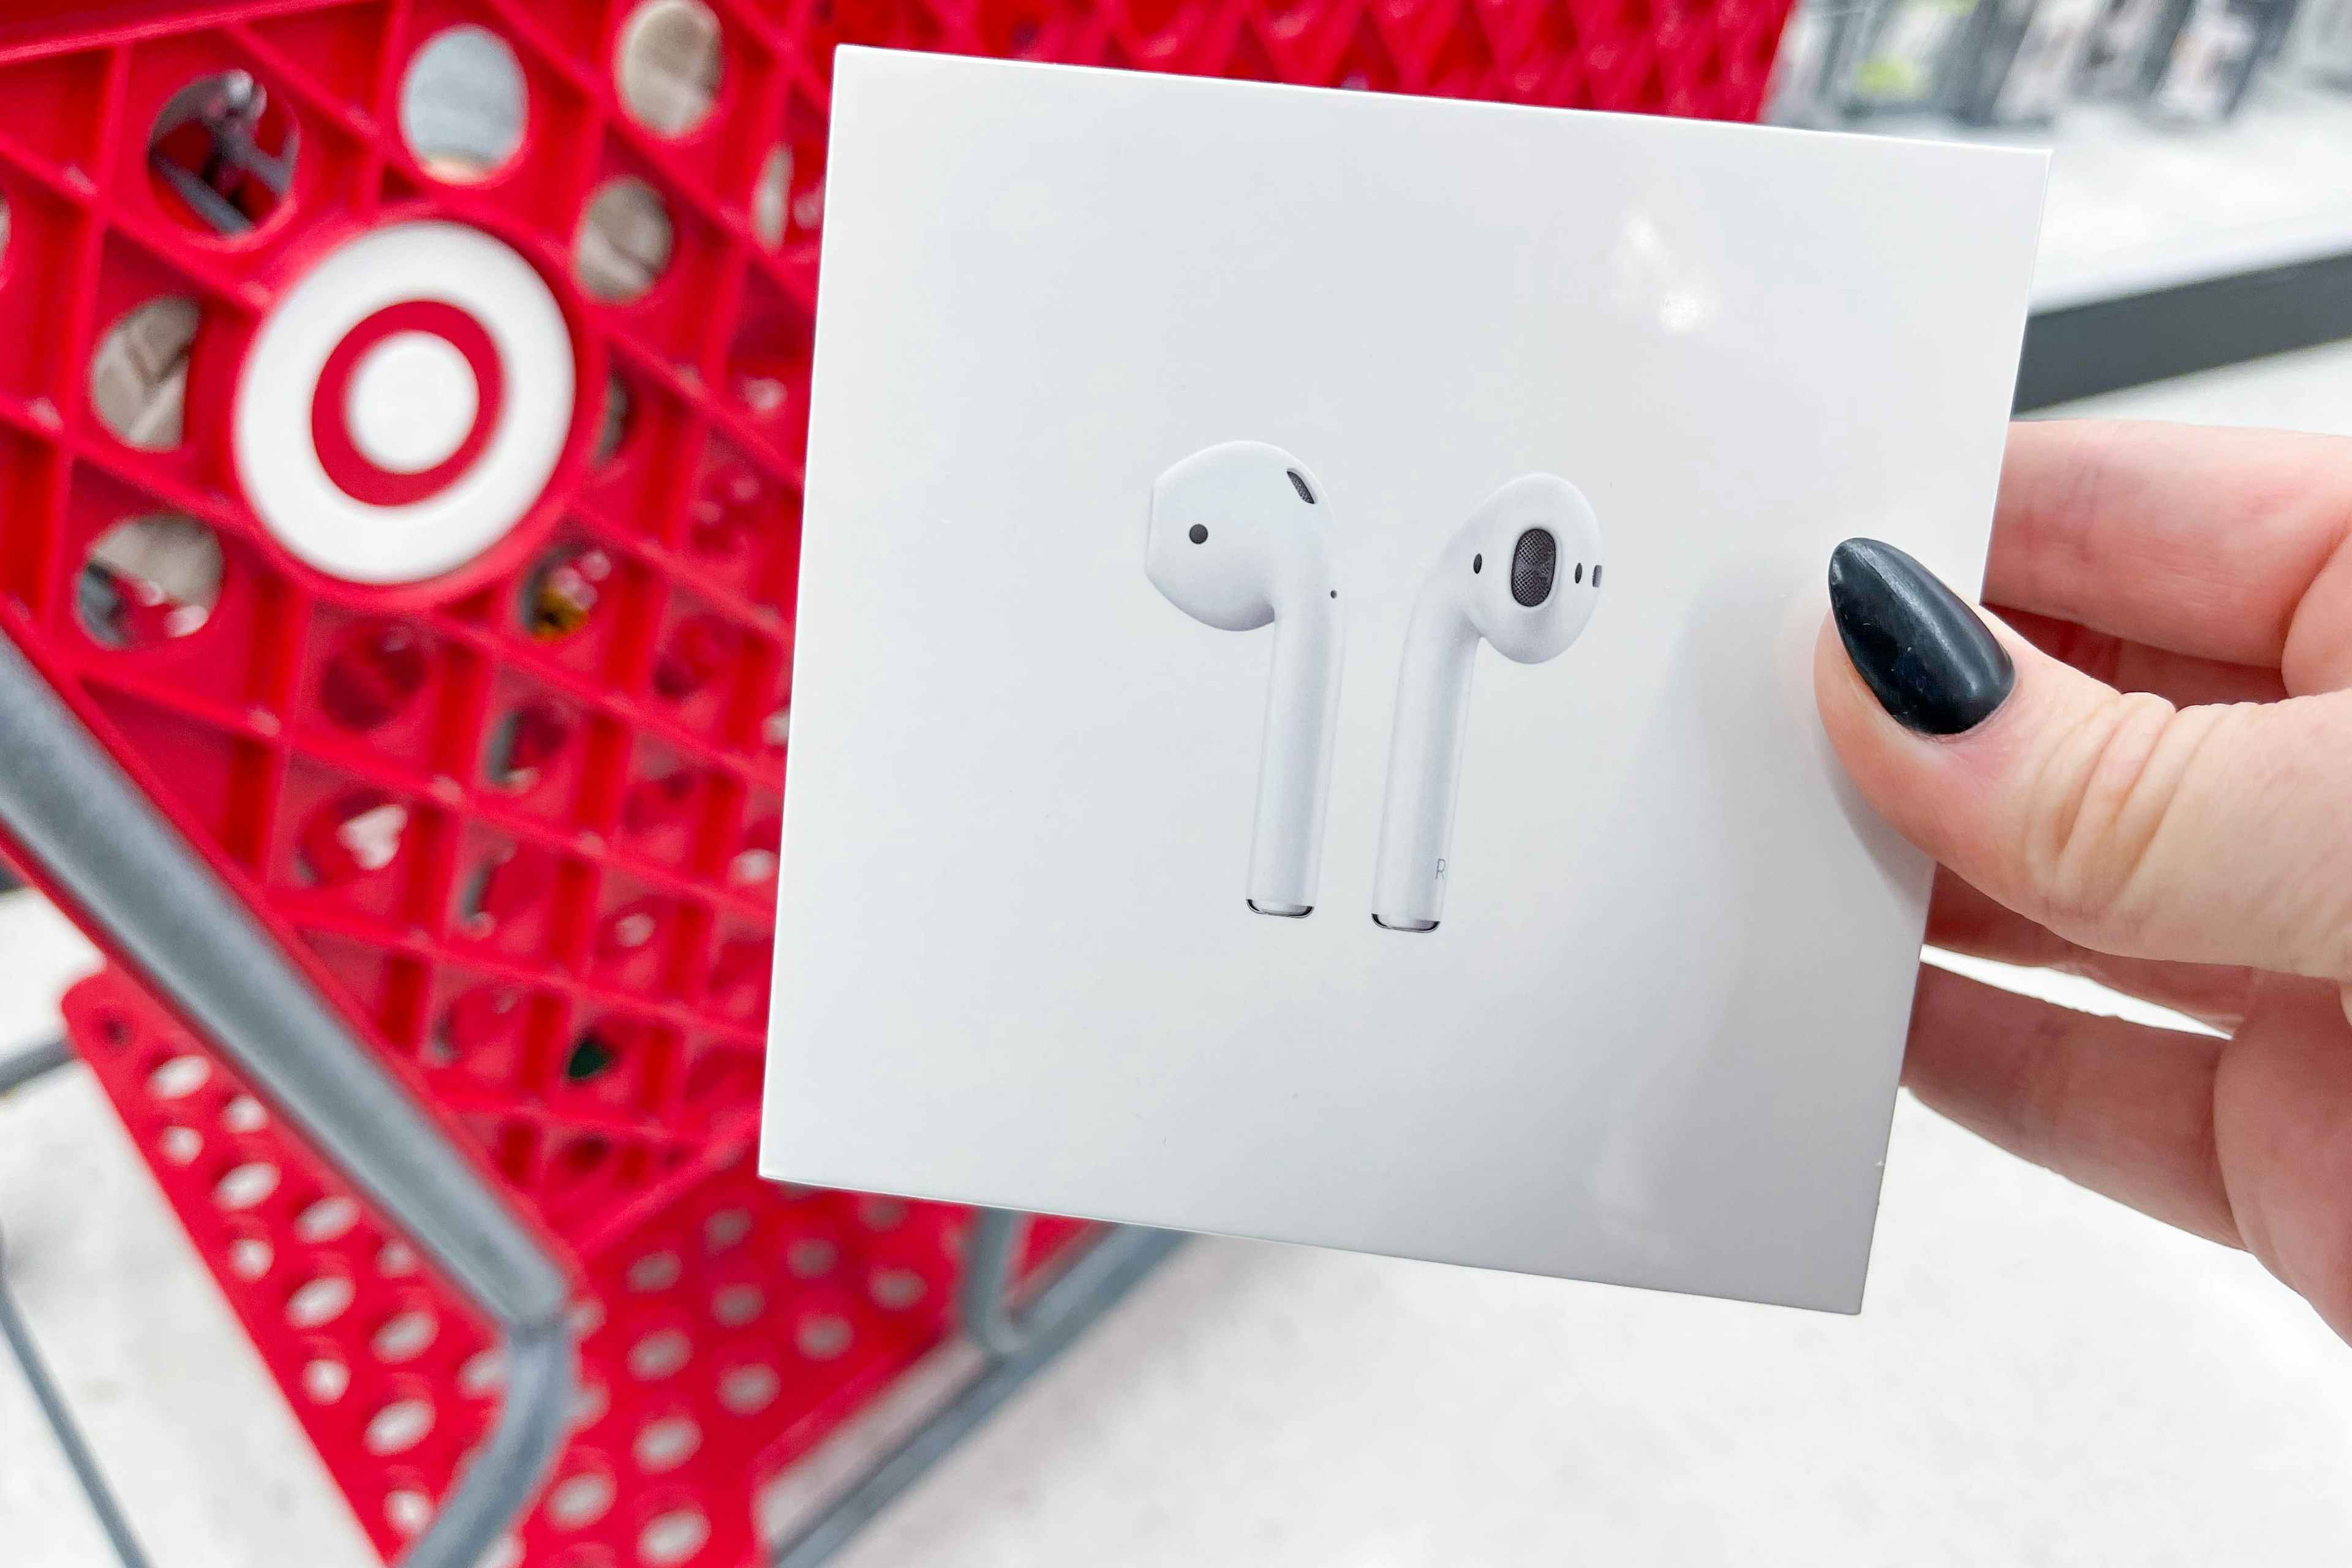 black-friday-target-airpods-2021-1